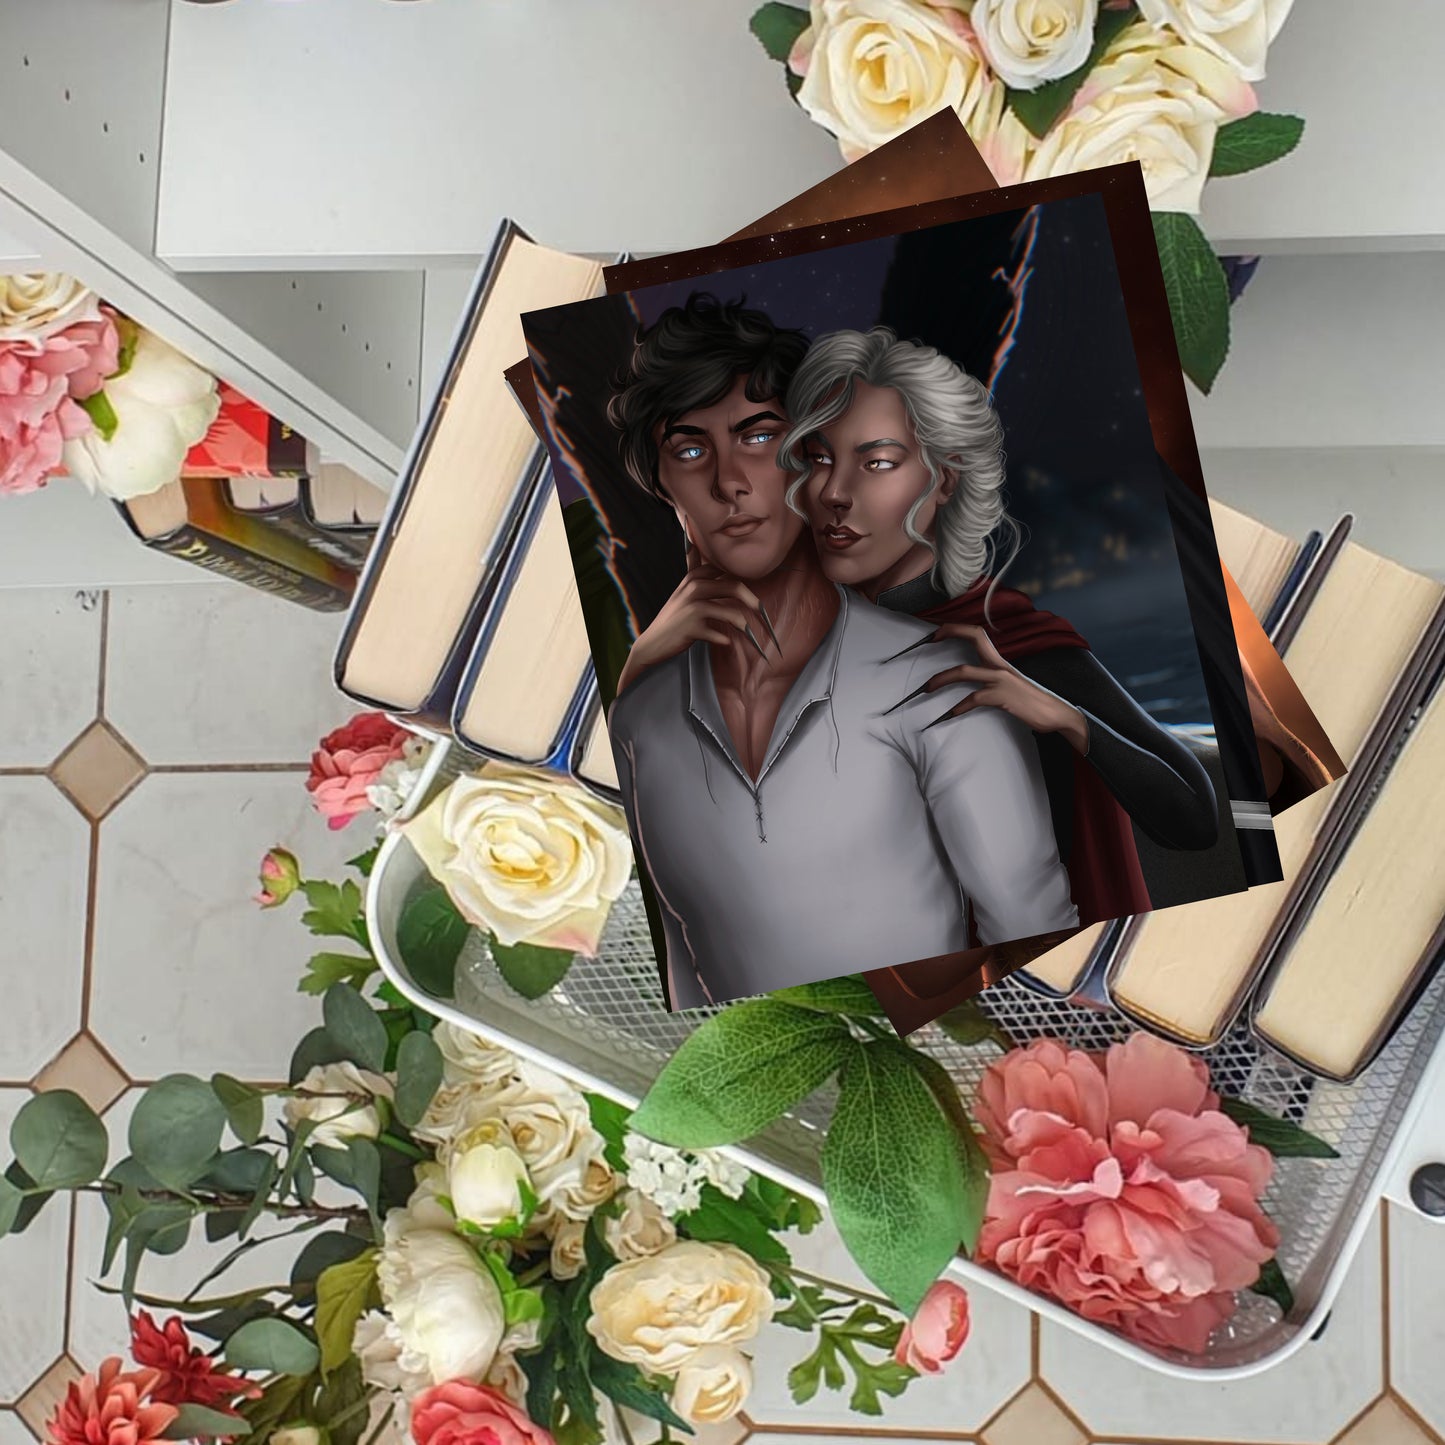 Princeling - Throne of Glass Licensed Manon and Dorian - Officially Licenced - Sarah J. Maas - Print